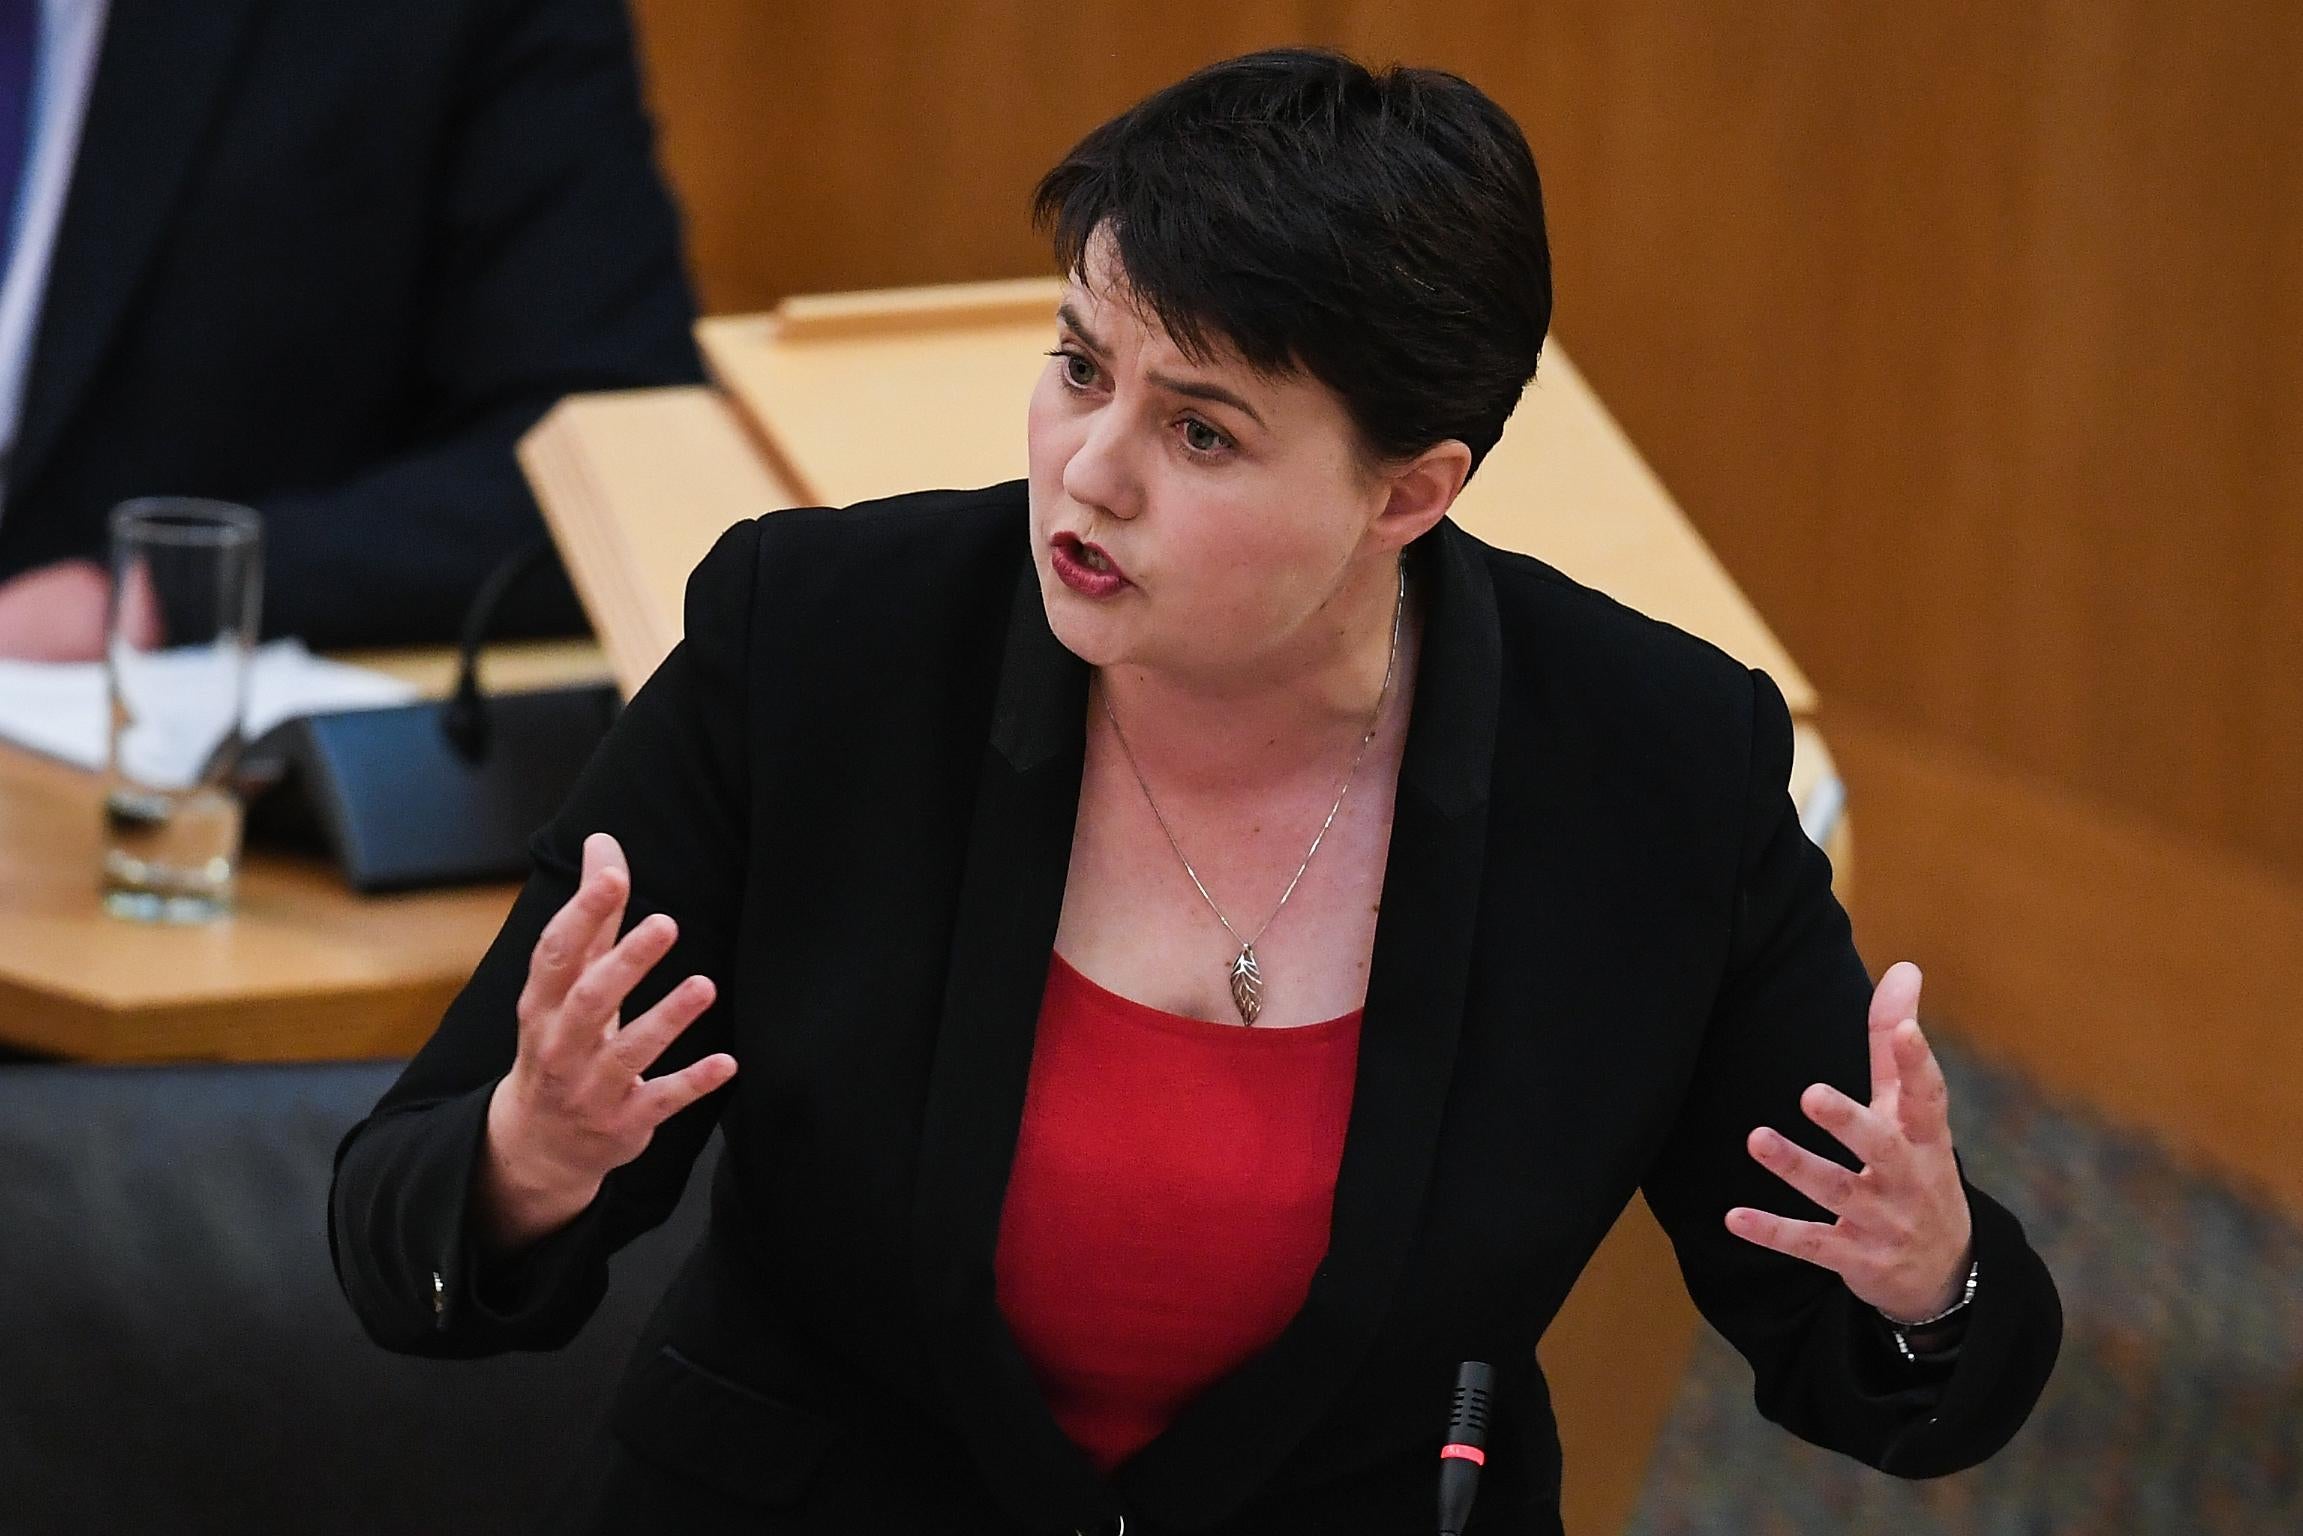 But for Ruth Davidson's leadership in Scotland, the Tories might be in opposition now